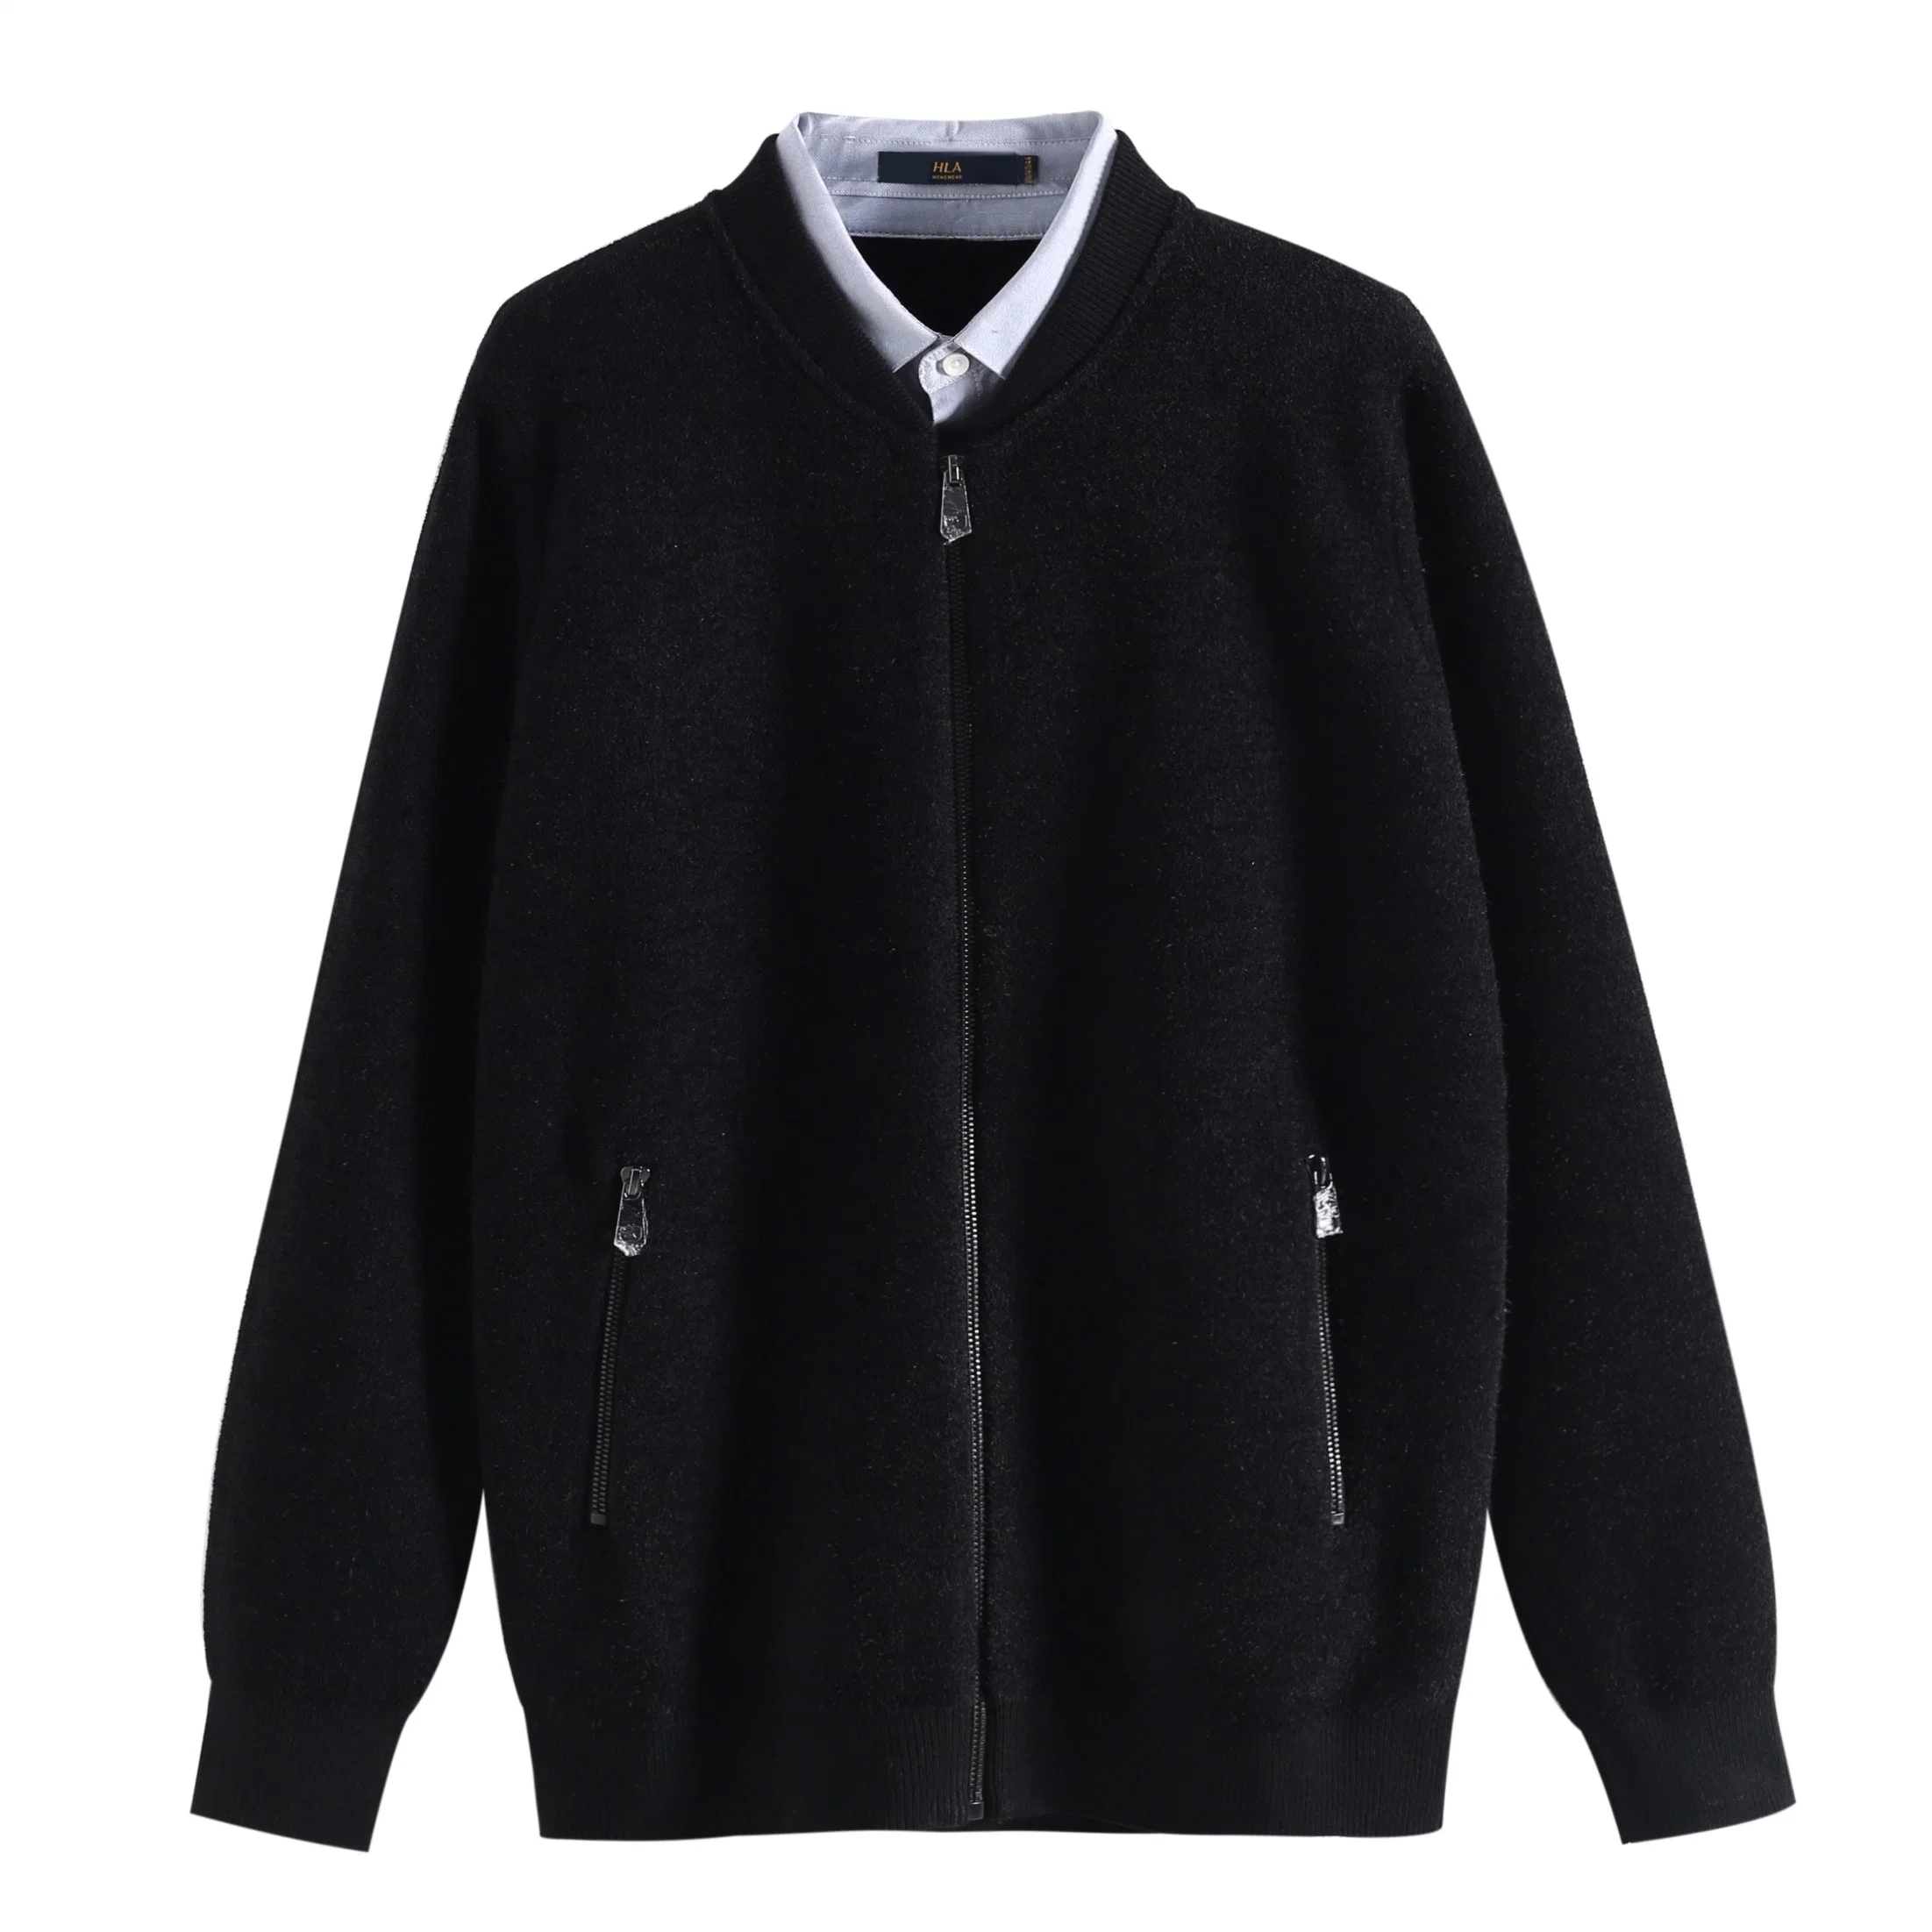 Winter/Autumn with Fake Two Woven Collar Sweater Men's Shirt New Knitted Casual Coat Thick Men's Wear with Zipper